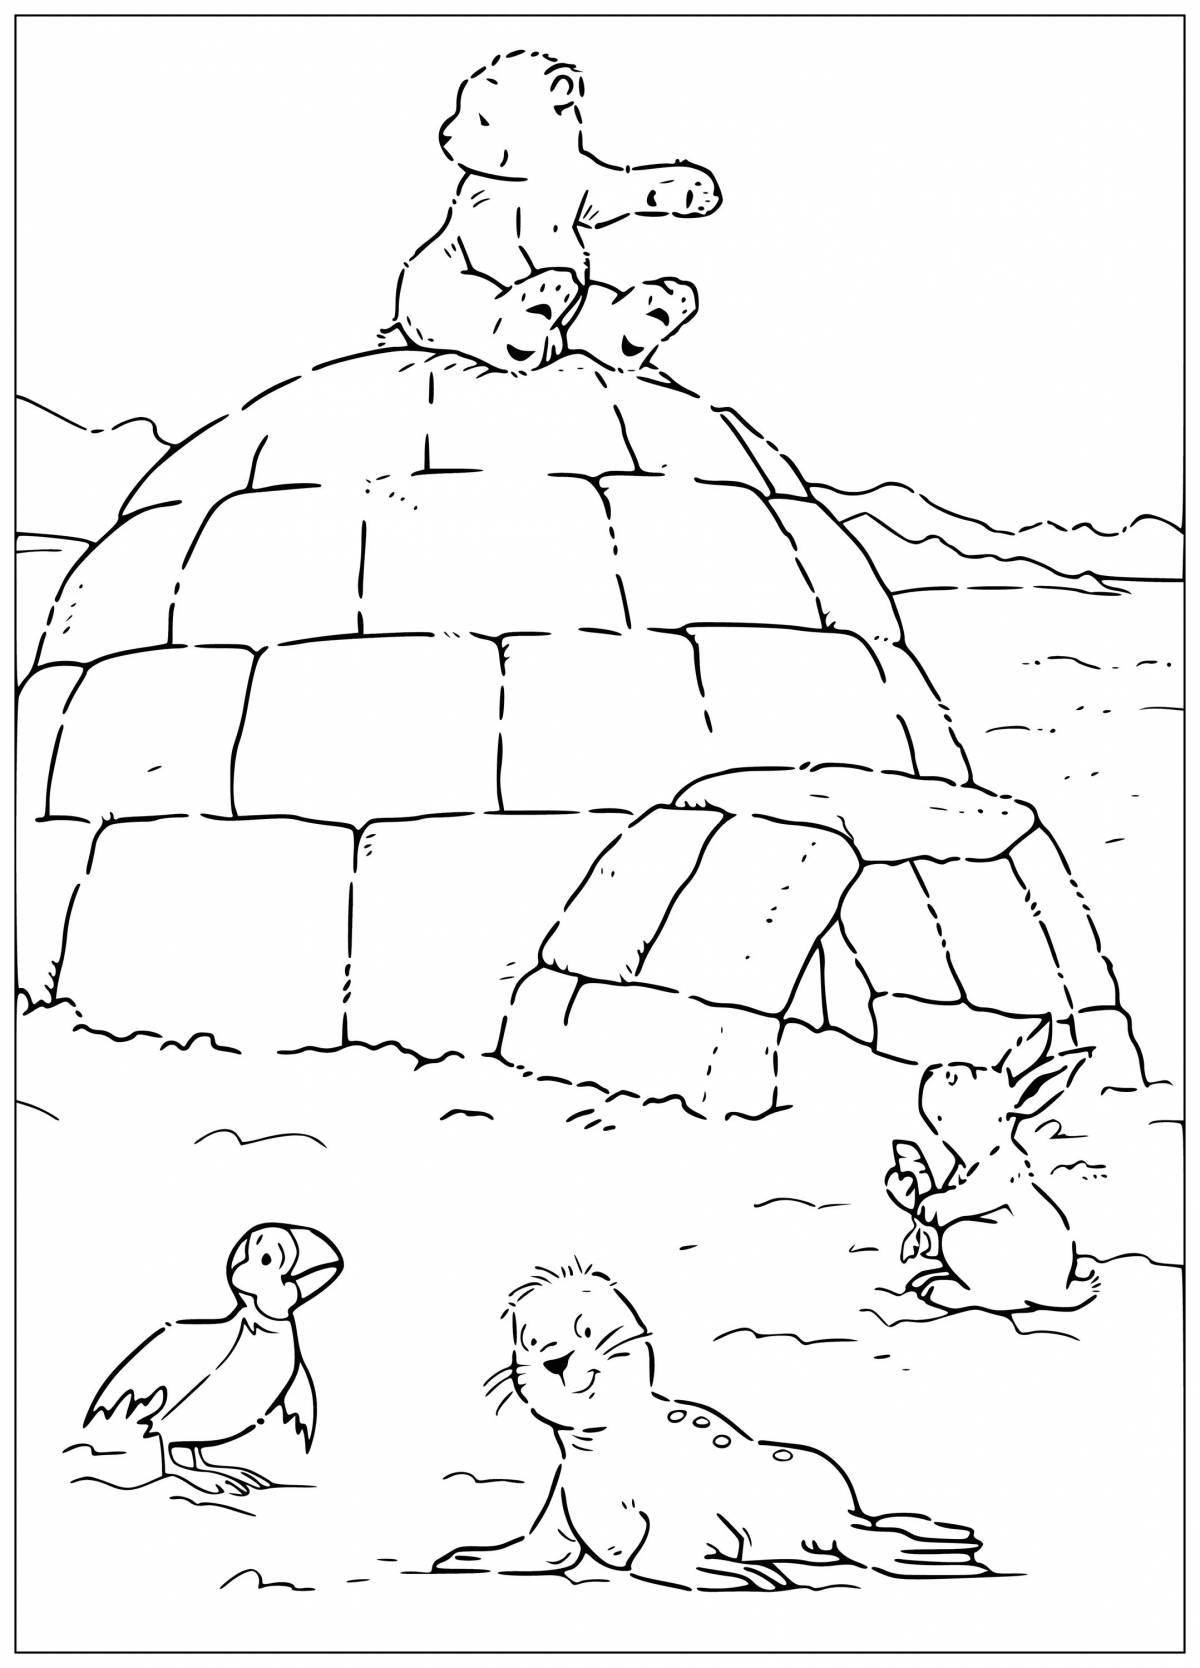 Fantastic north pole coloring book for kids